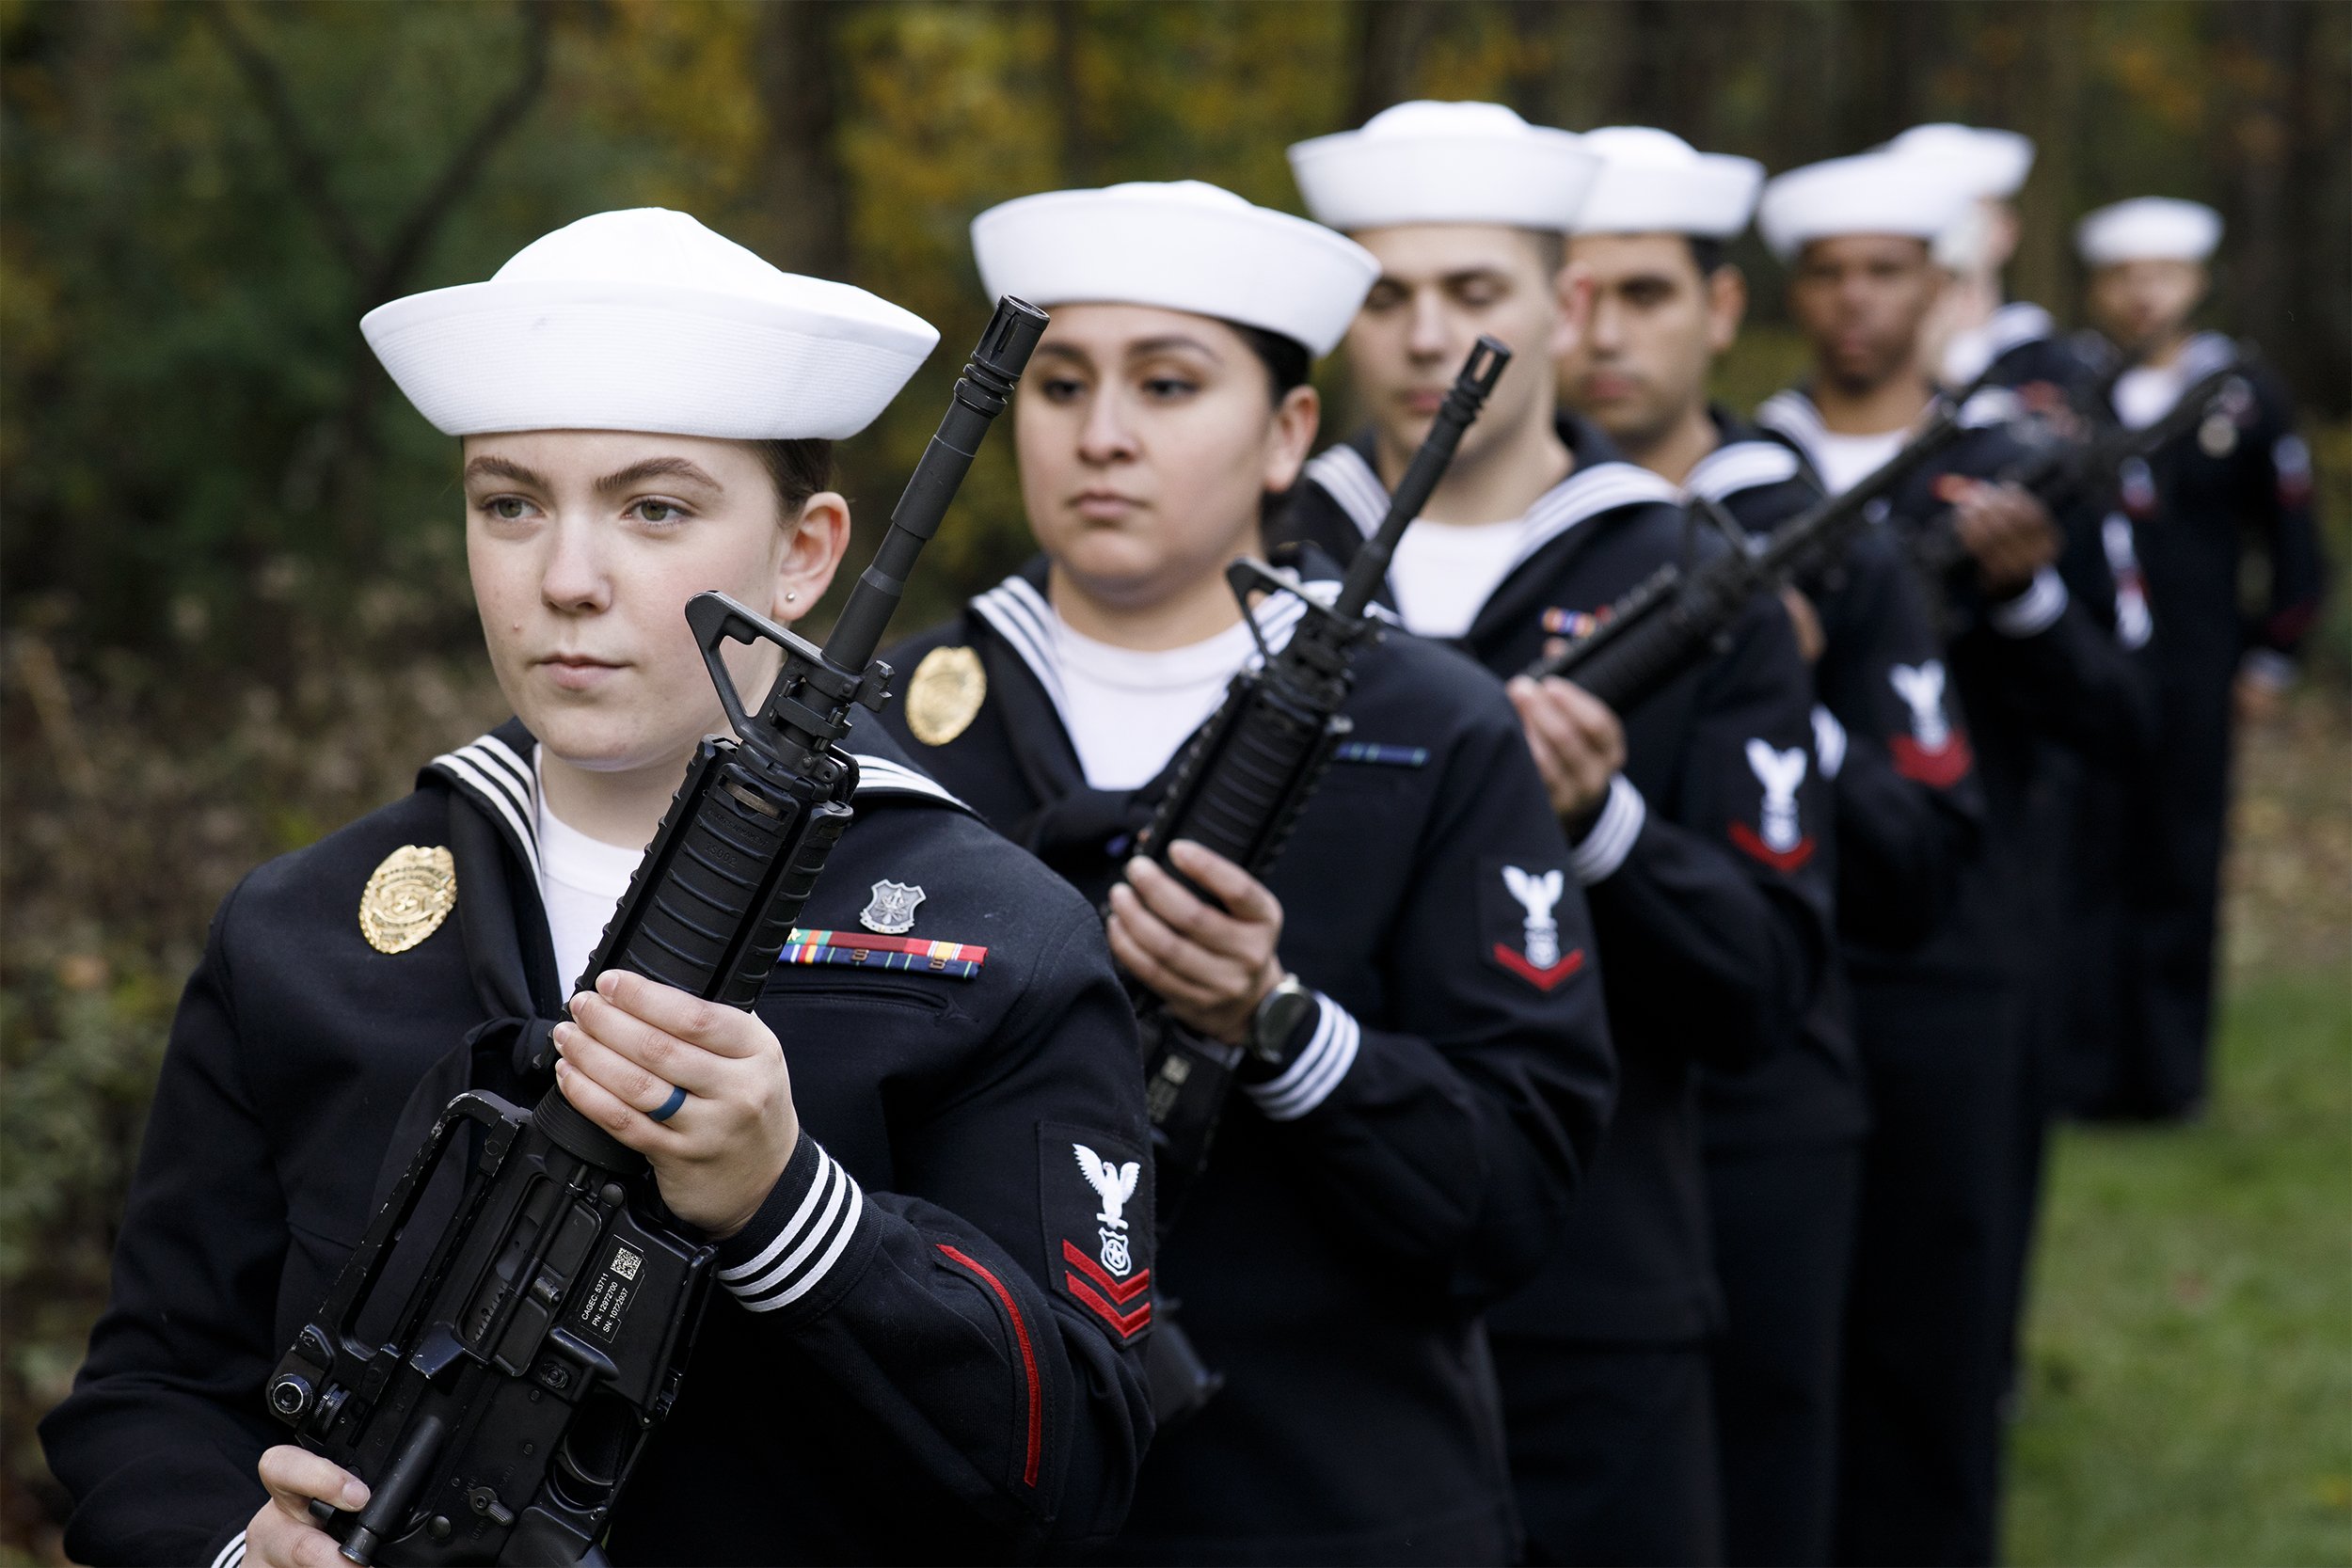  Members of the honor guard port arms at the funeral of Seaman 1st Class Wesley Ernest Graham at Fort Custer National Cemetery on Wednesday, October 27, 2021. Graham’s remains were finally returned to the United States to be put to rest 80 years late